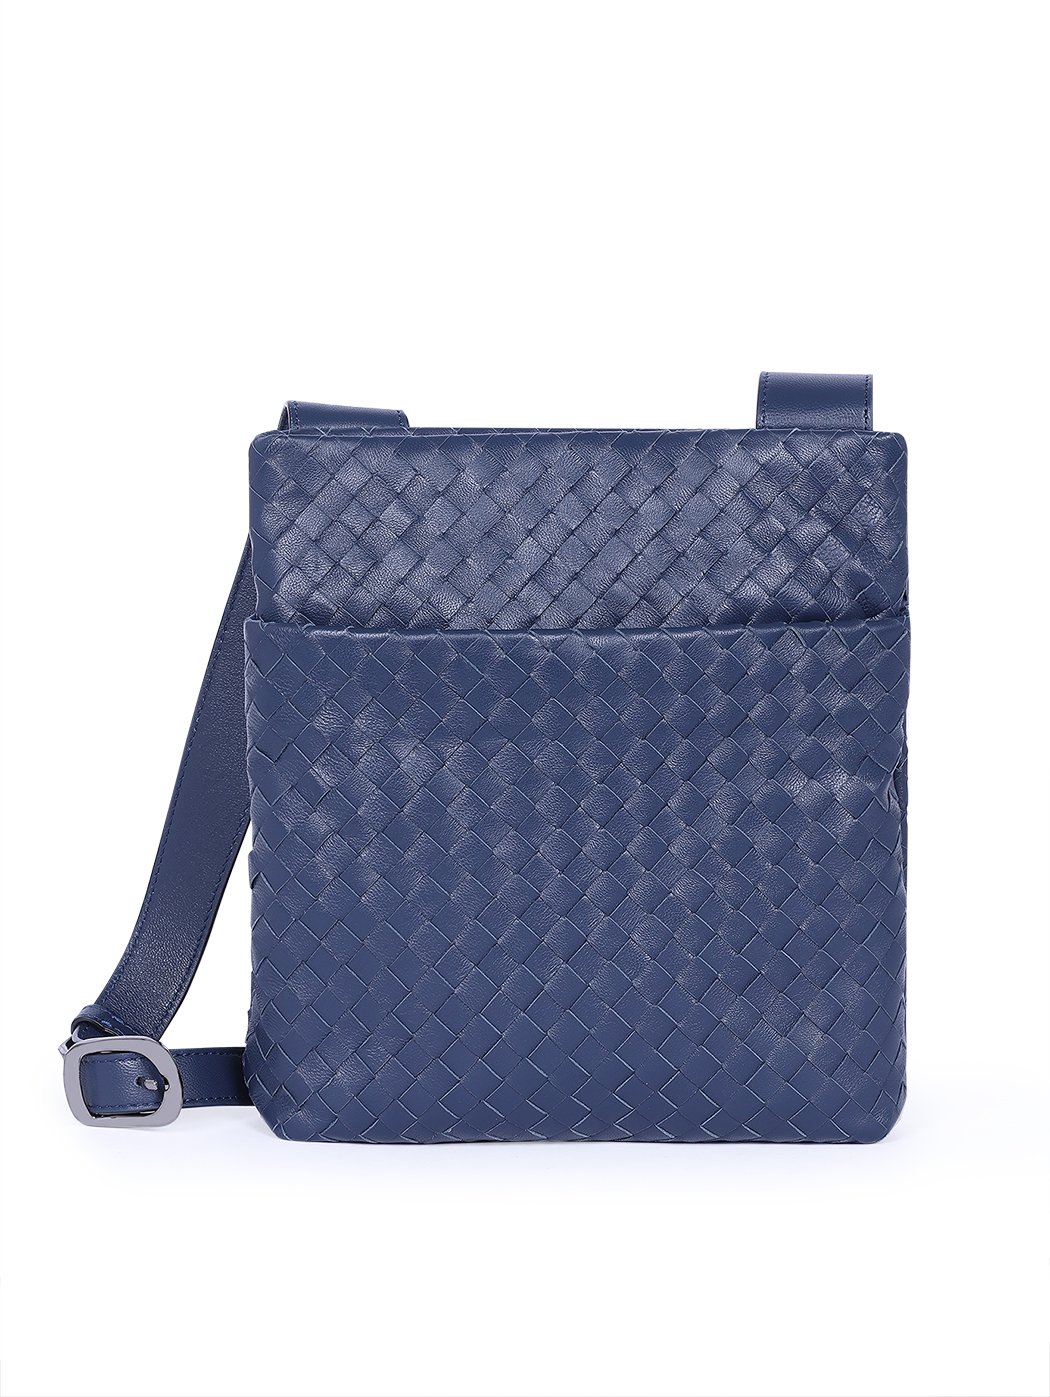 Square Crossbody Woven Leather Bag Blue